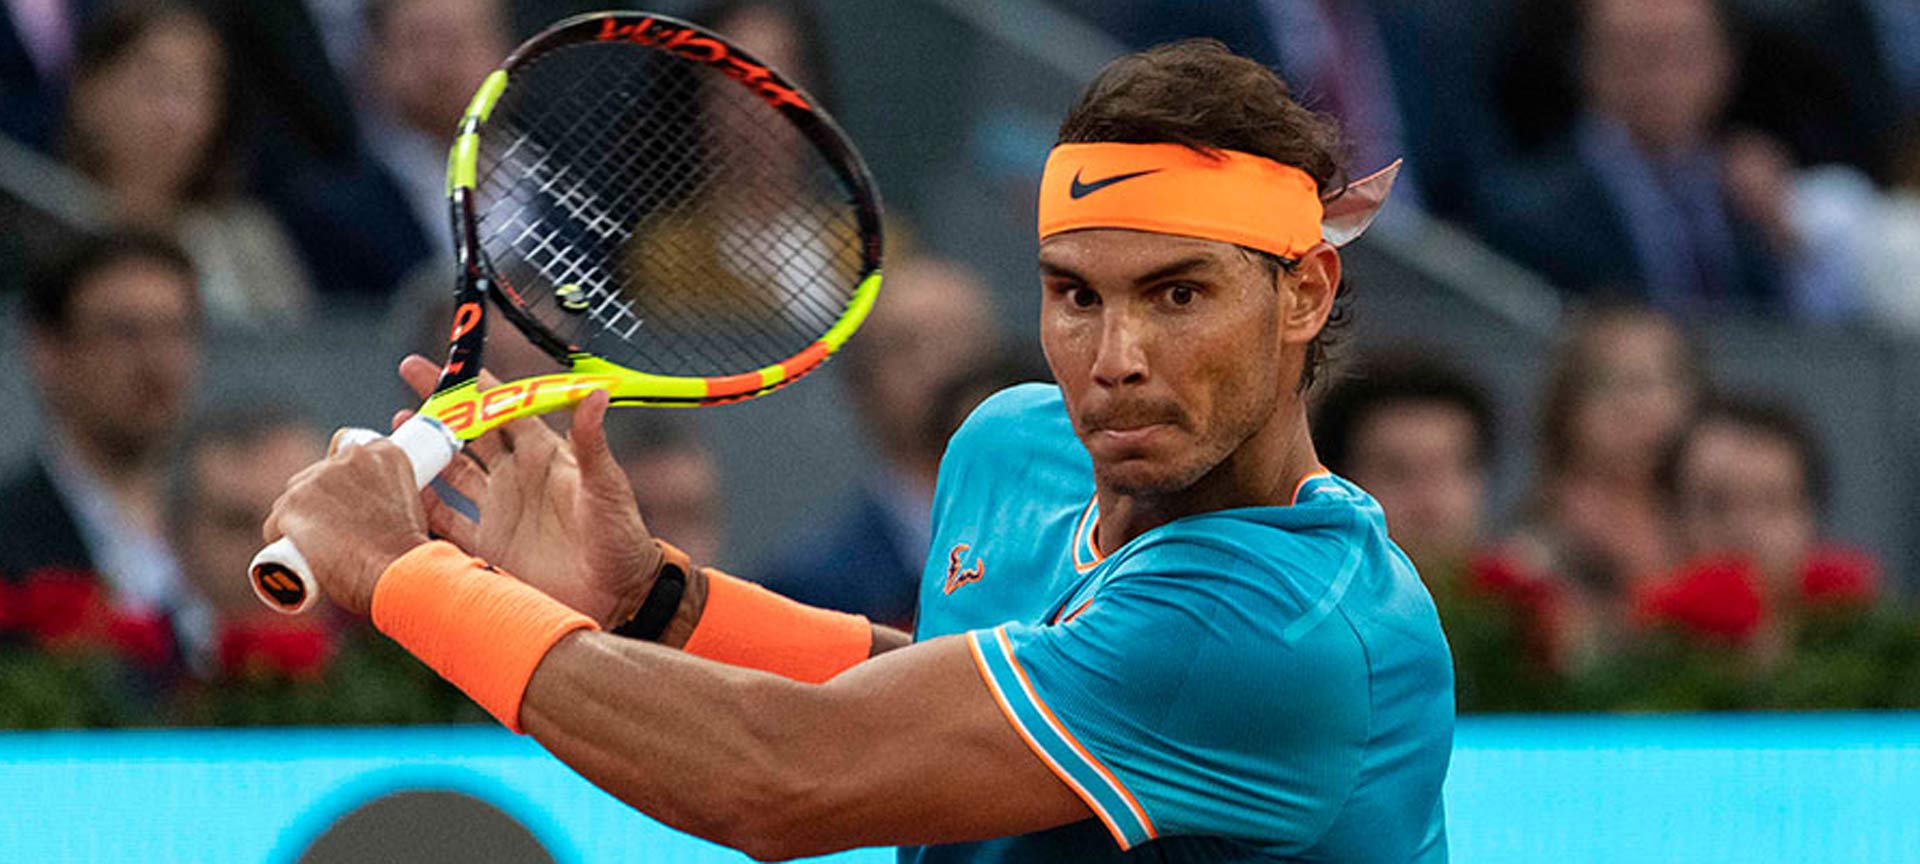 Nadal during a match against Tiafoe in the 2019 edition